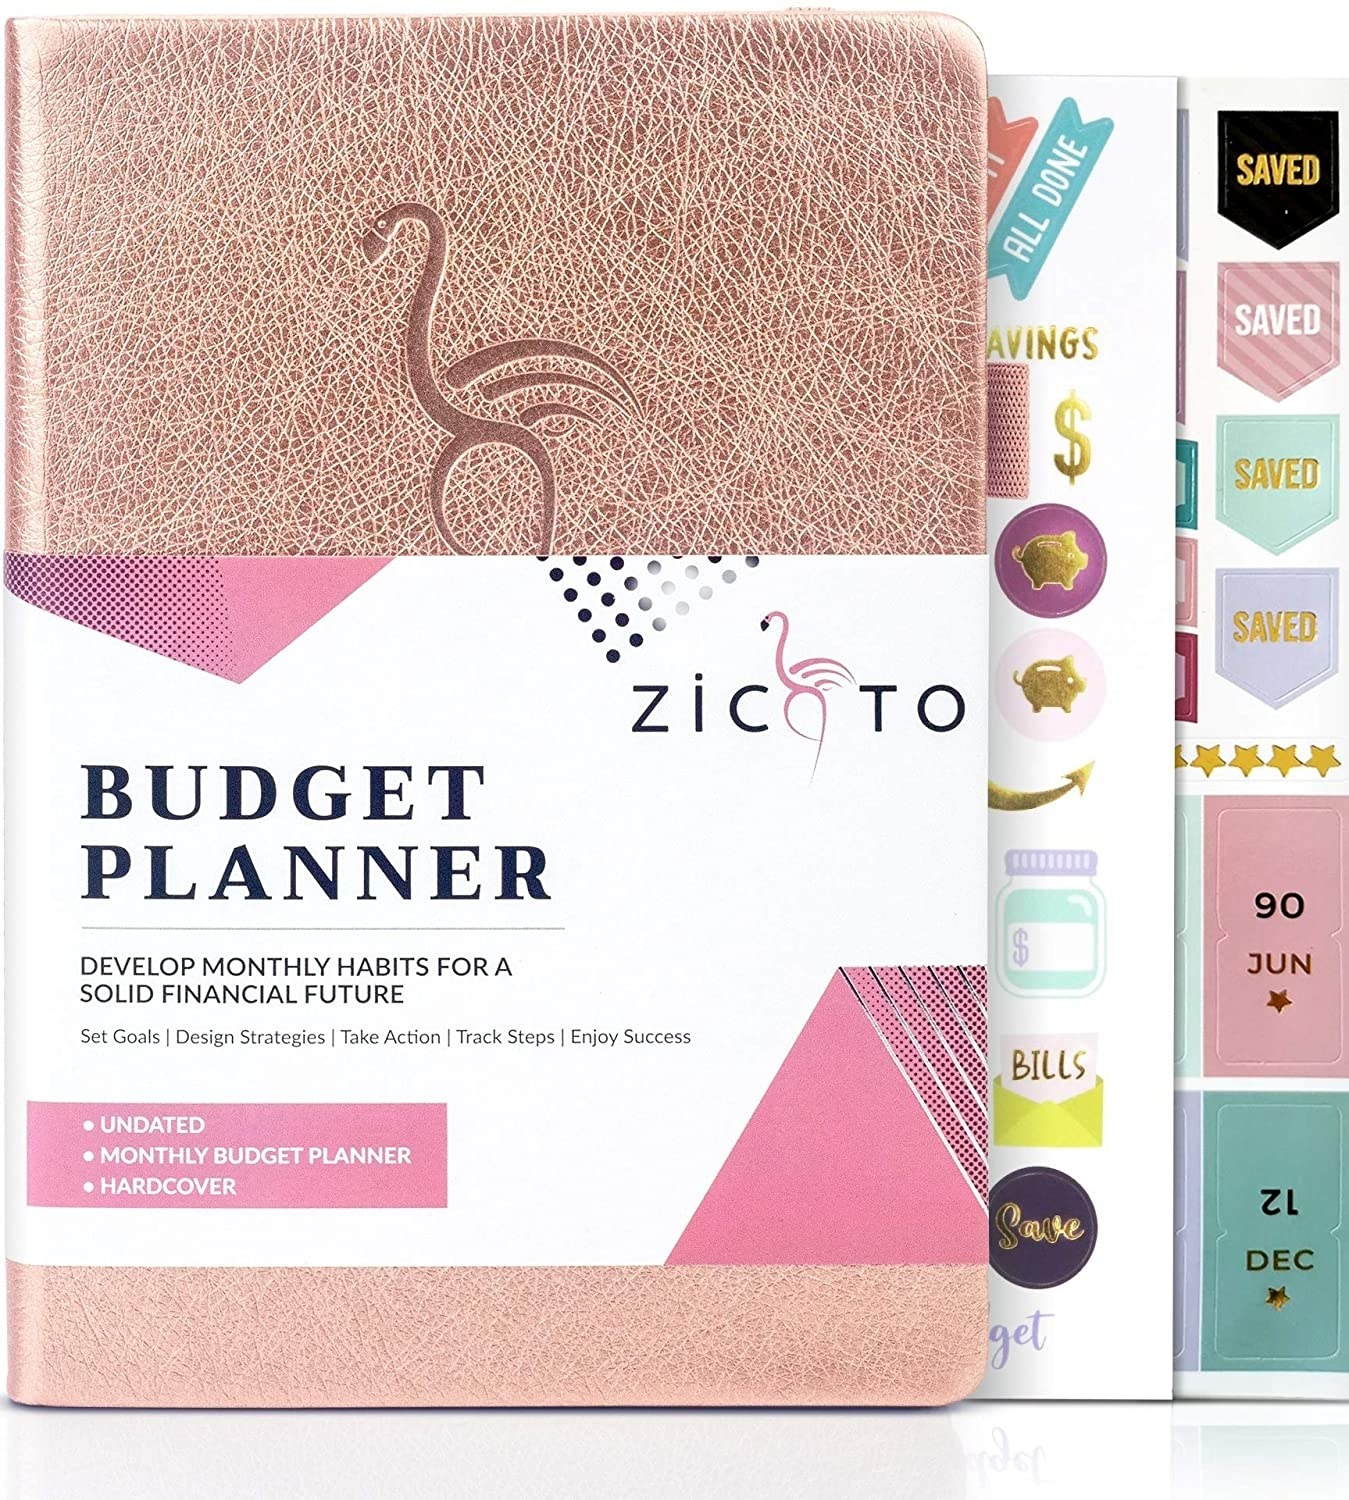 Product photo of the Zicoto Budget Planner in rose gold